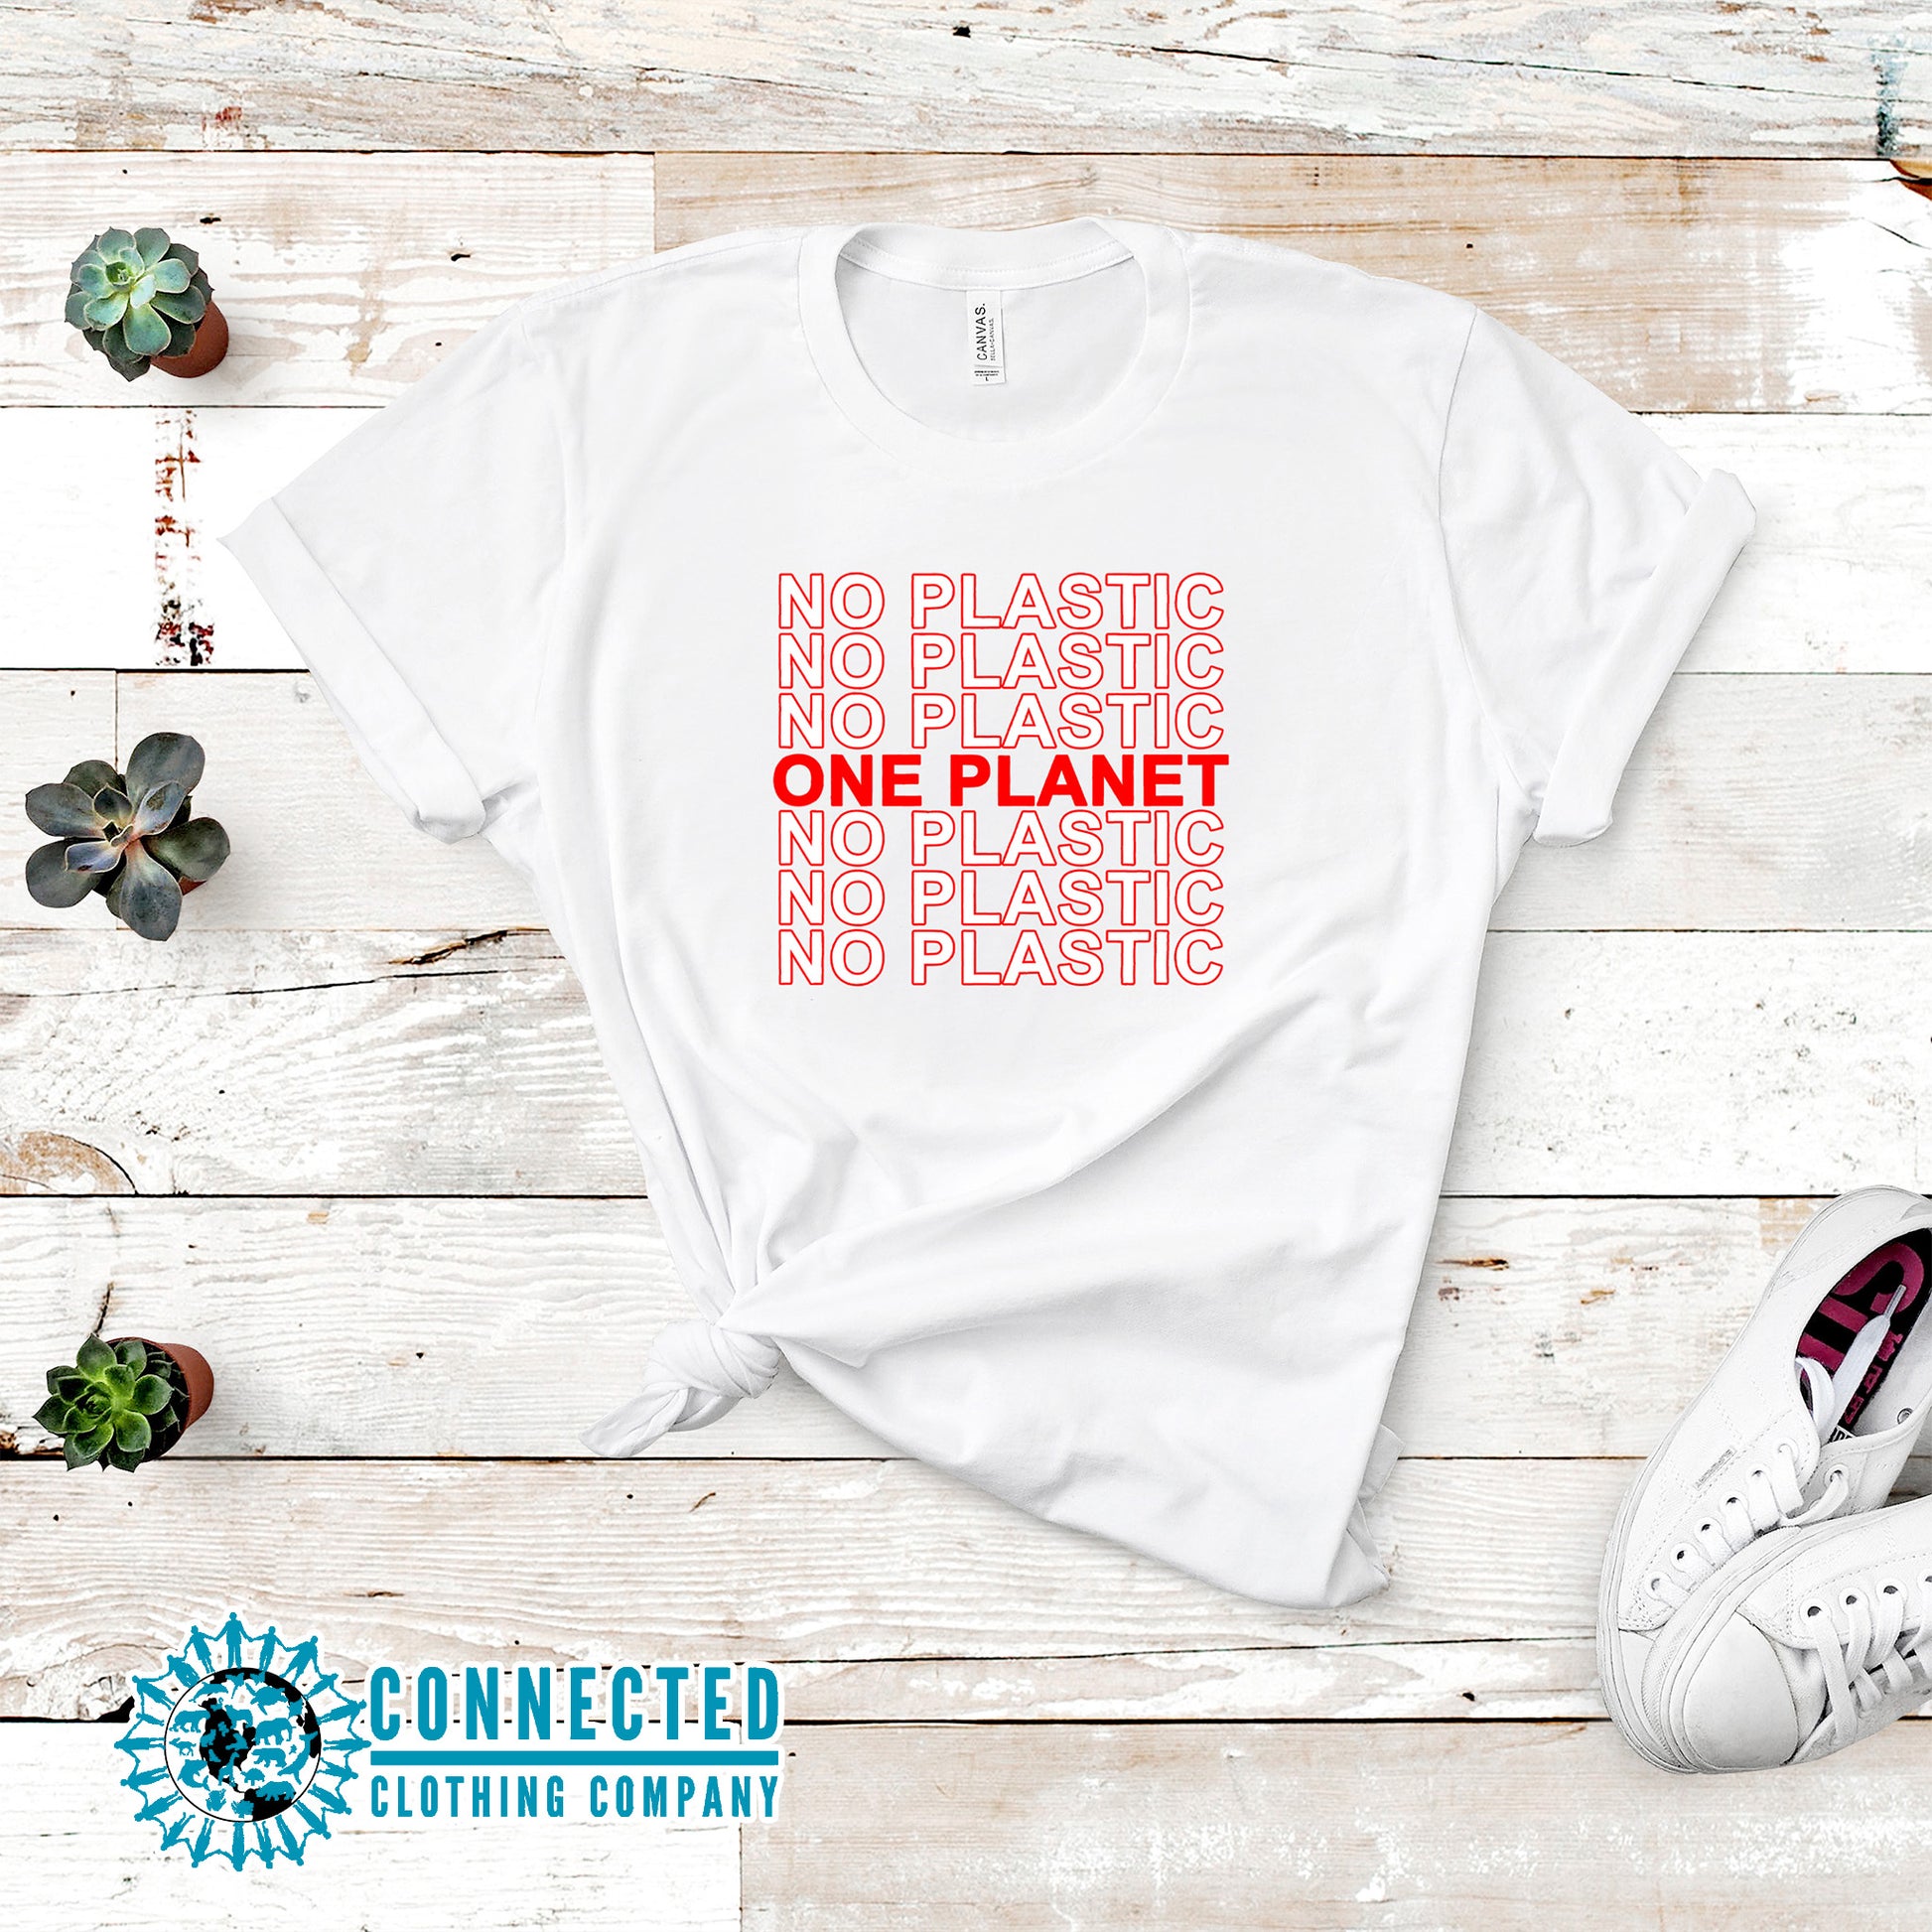 White No Plastic One Planet Short-Sleeve Tee - 10% of profits donated to ocean conservation